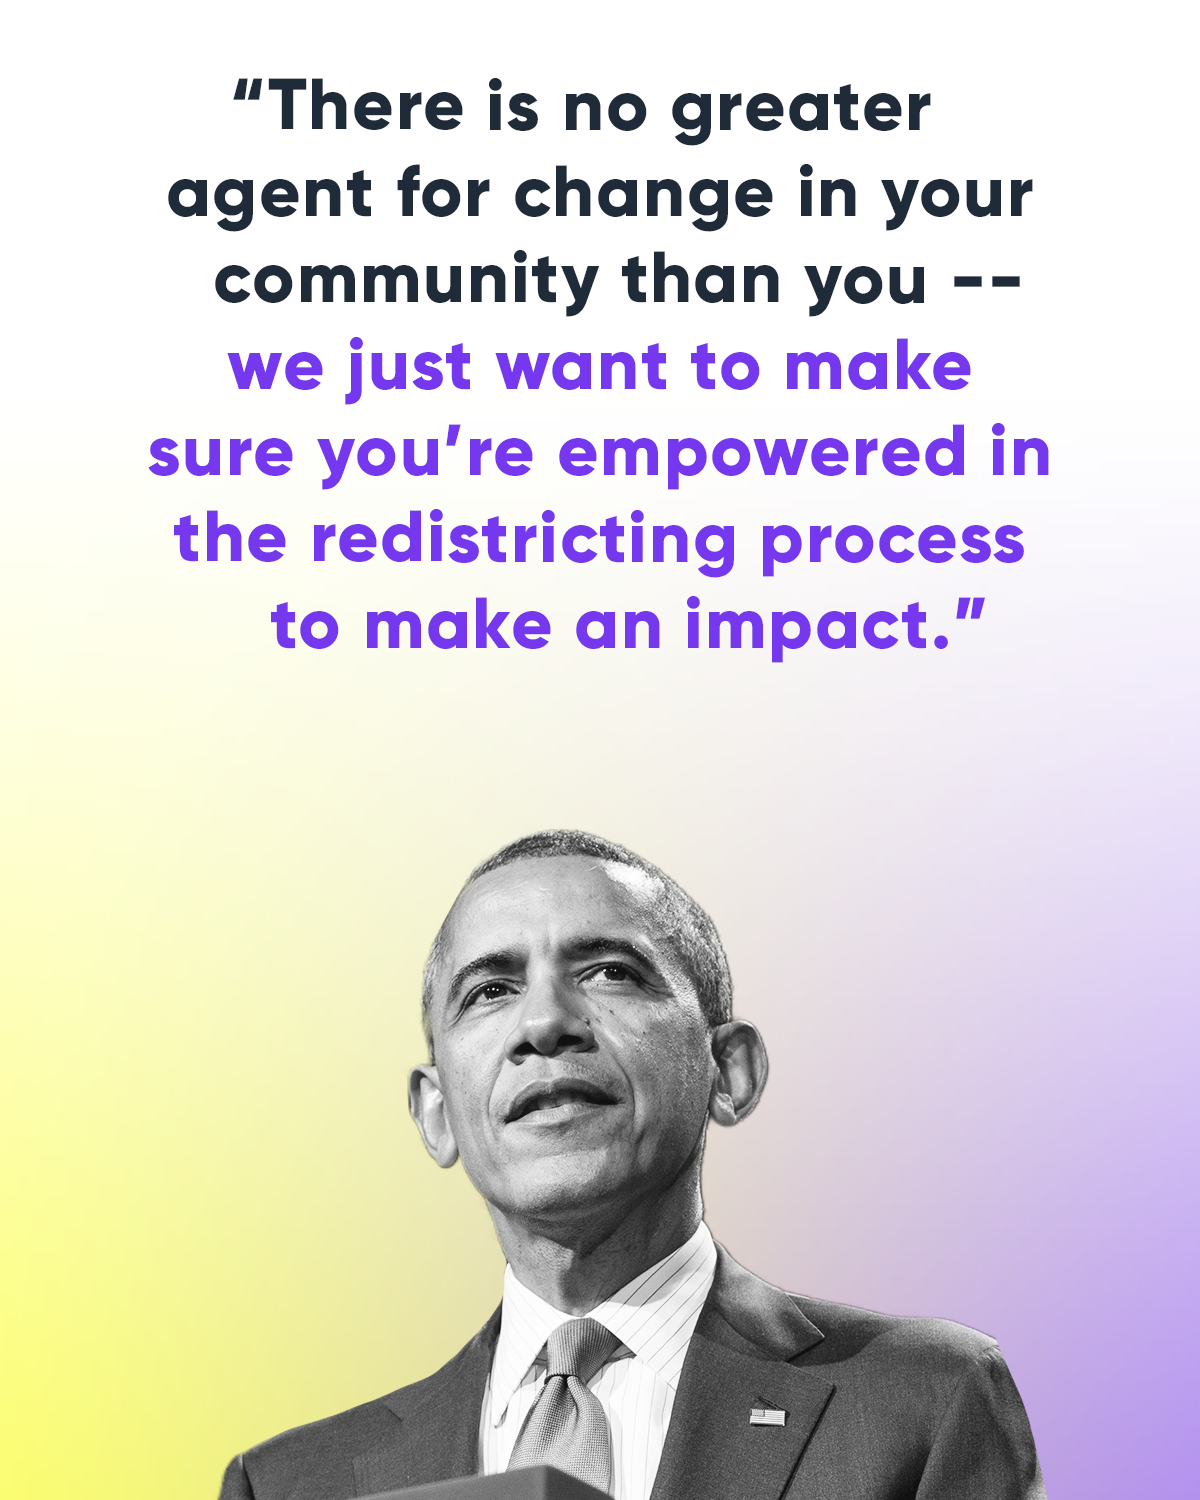 “There is no greater agent for change in your community than you -- we just want to make sure you’re empowered in the redistricting process to make an impact. -- President Obama